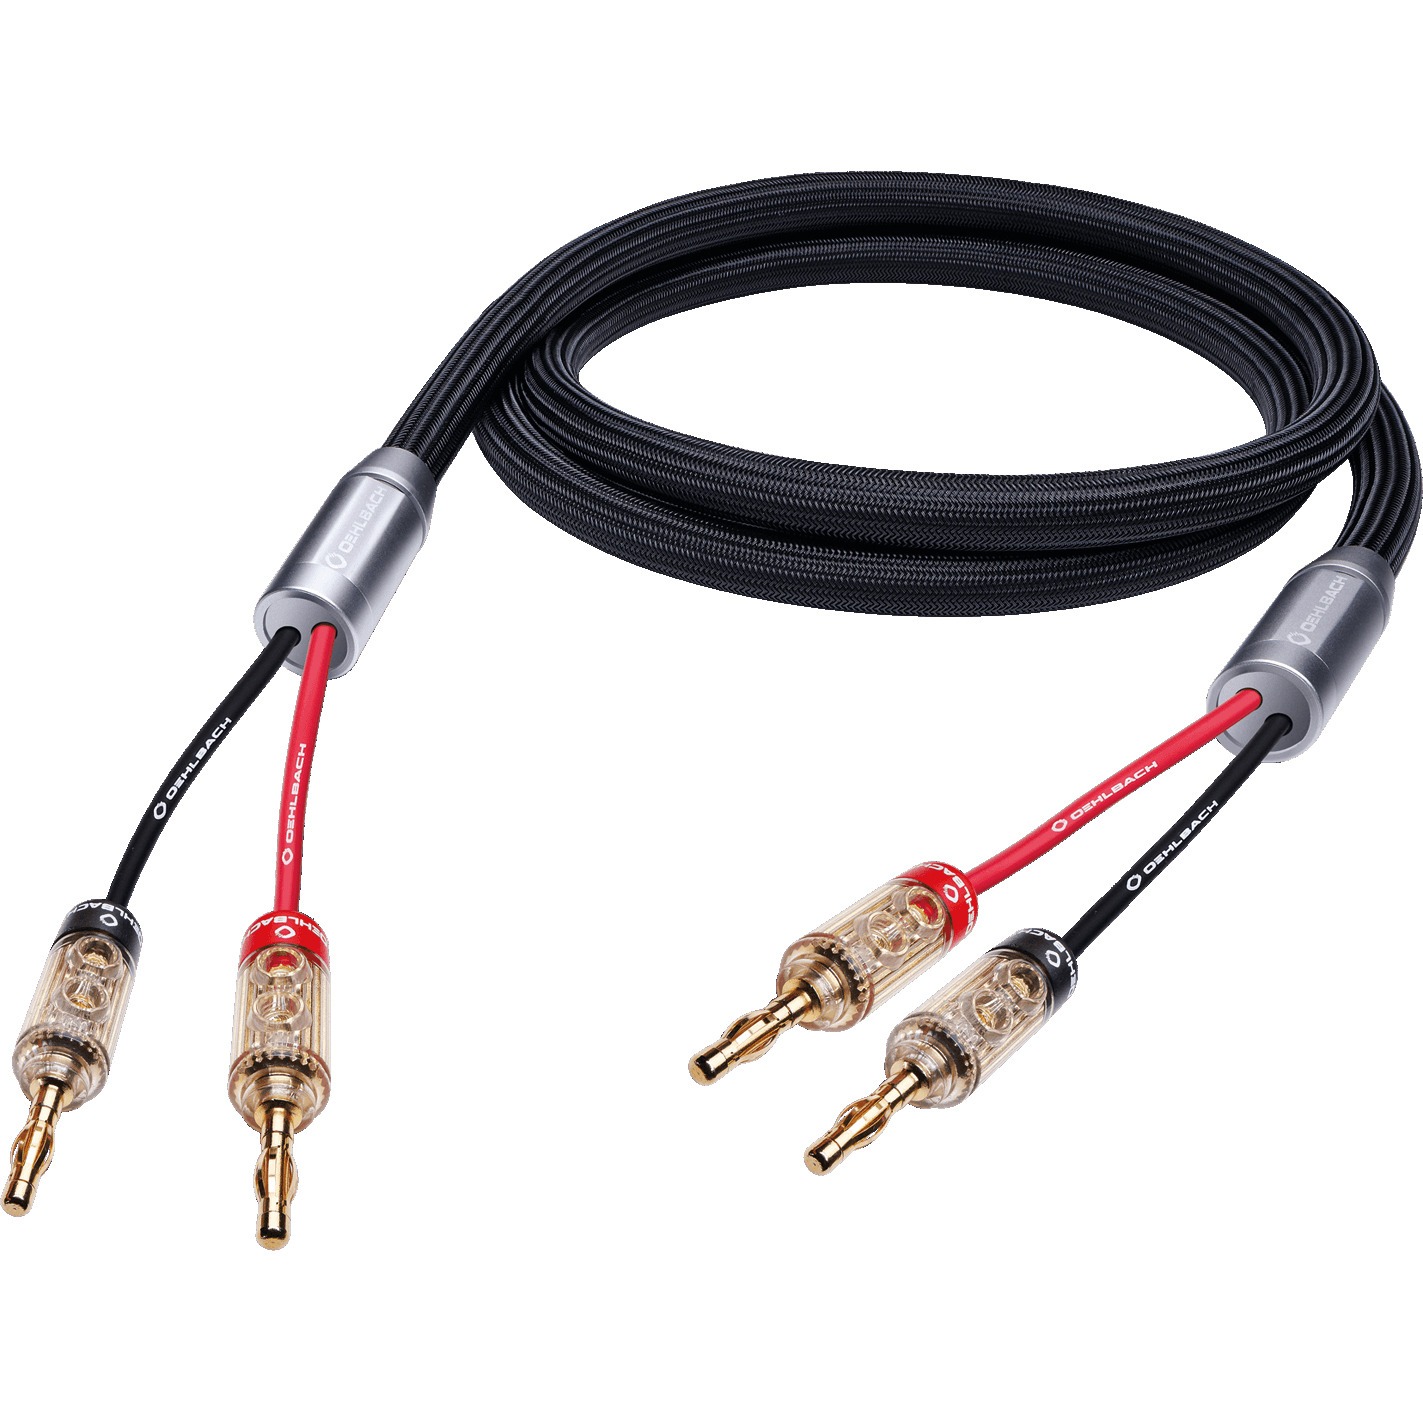 Кабели акустические с разъёмами Oehlbach STATE OF THE ART XXL Fusion Two Cable Set, 2x3,5 w.banana, D1C110614 кабели межблочные аудио oehlbach state of the art xxl cable xlr 2x1 50m gold d1c13134